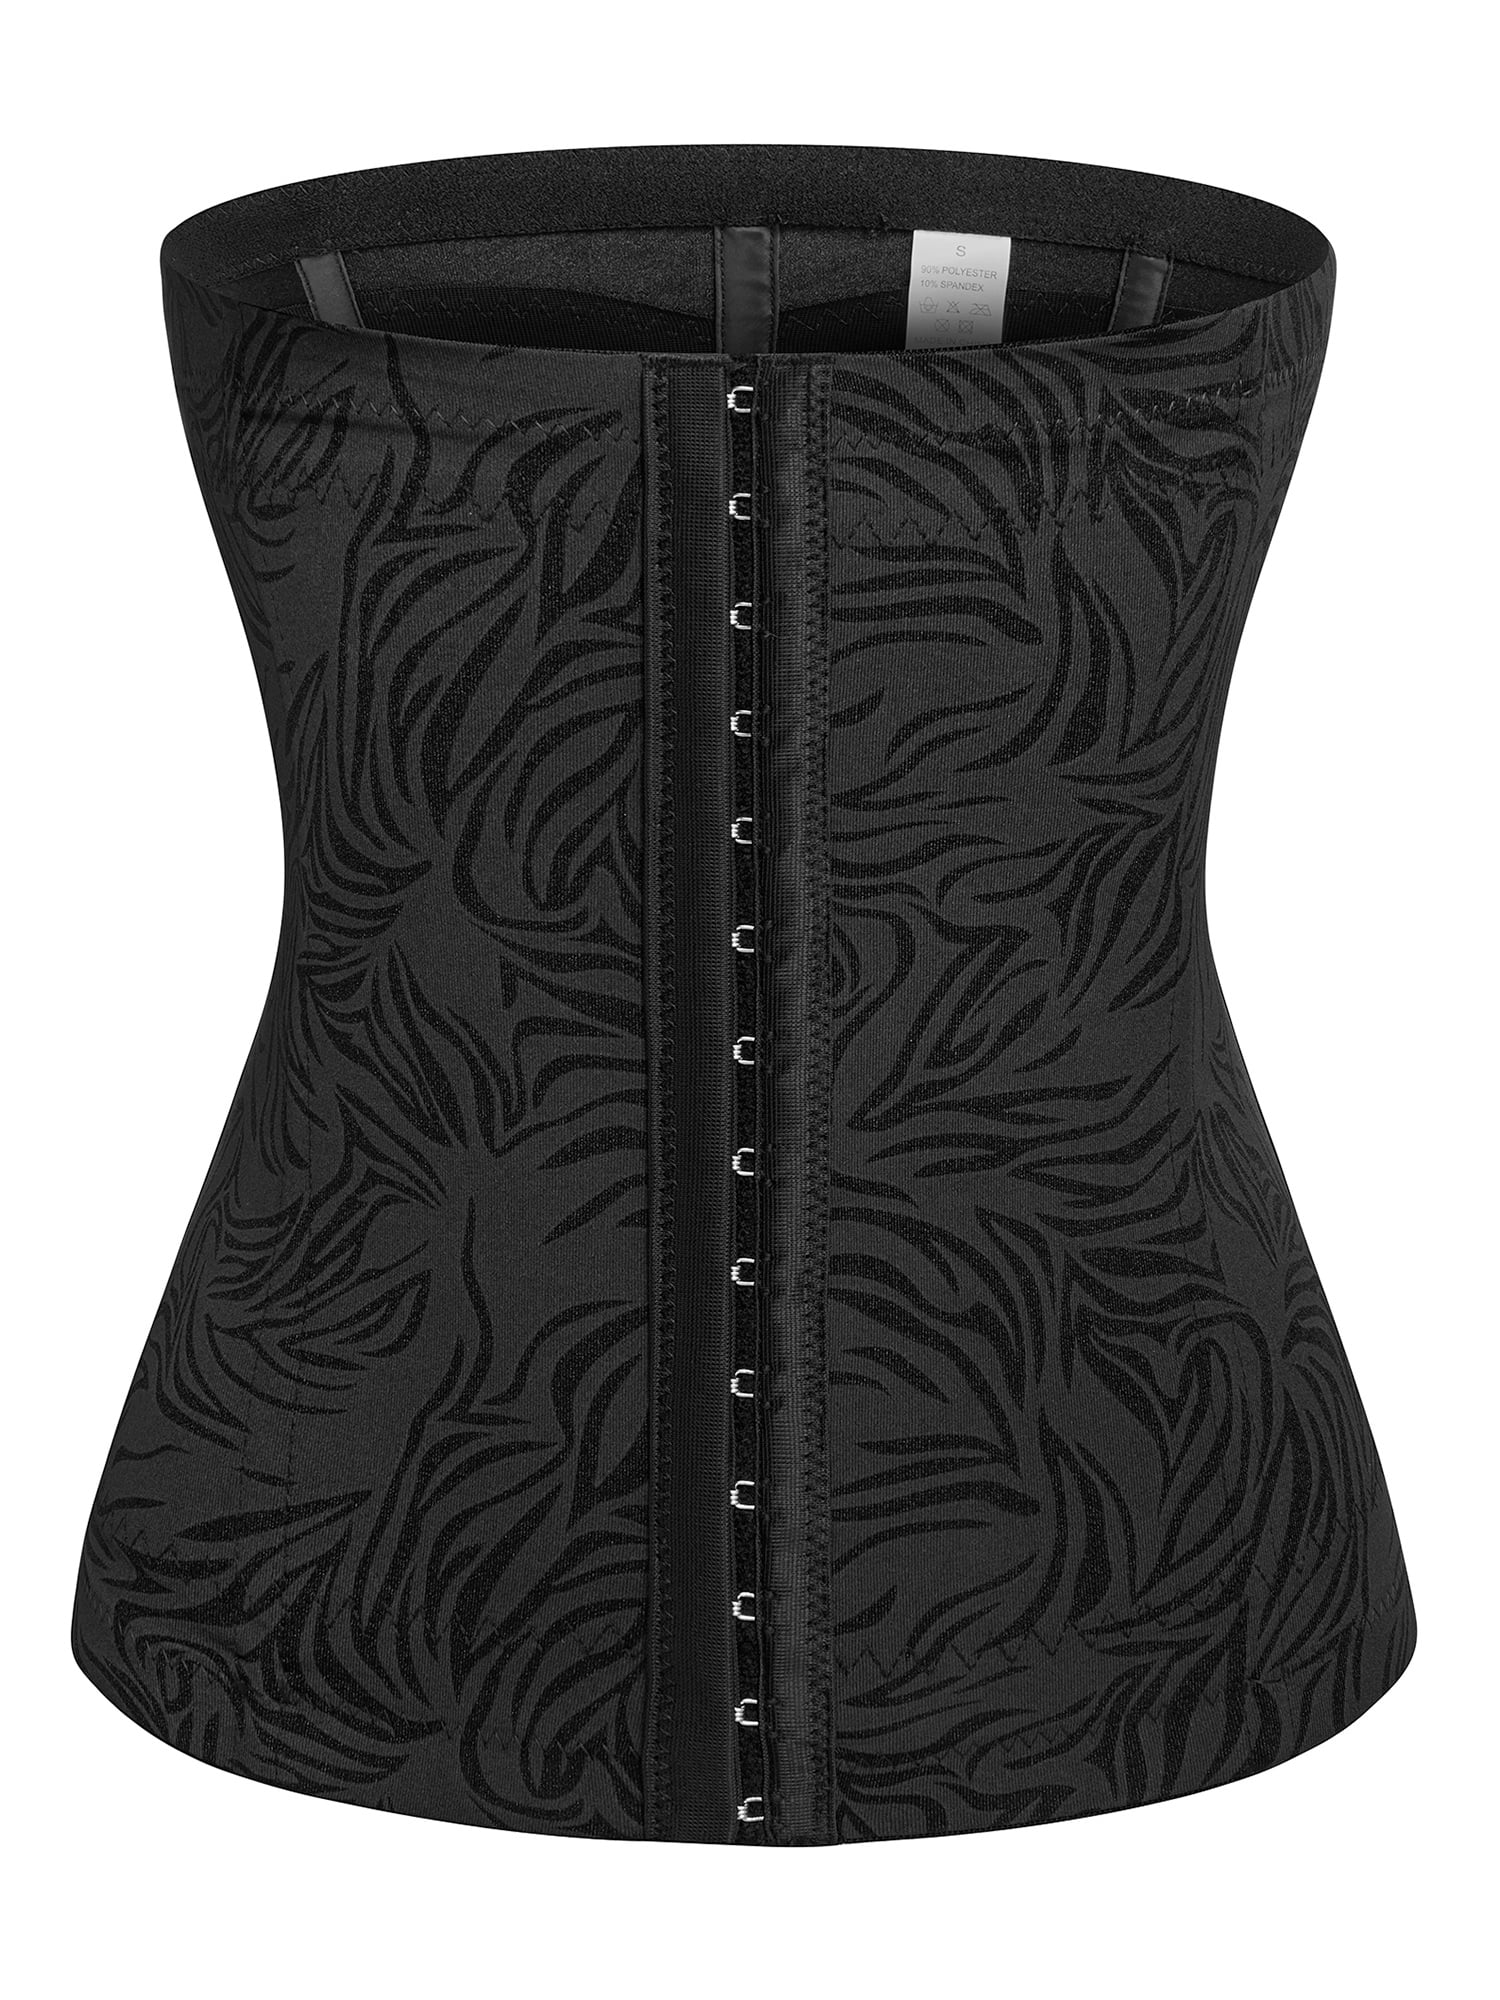 Womens Spandex Waist Trainer Cincher Corset for Weight Loss Ultra Firm  Control Hourglass Body Shaper Sport Girdle with Steel Bones, Plus Size  S-3XL,Black 